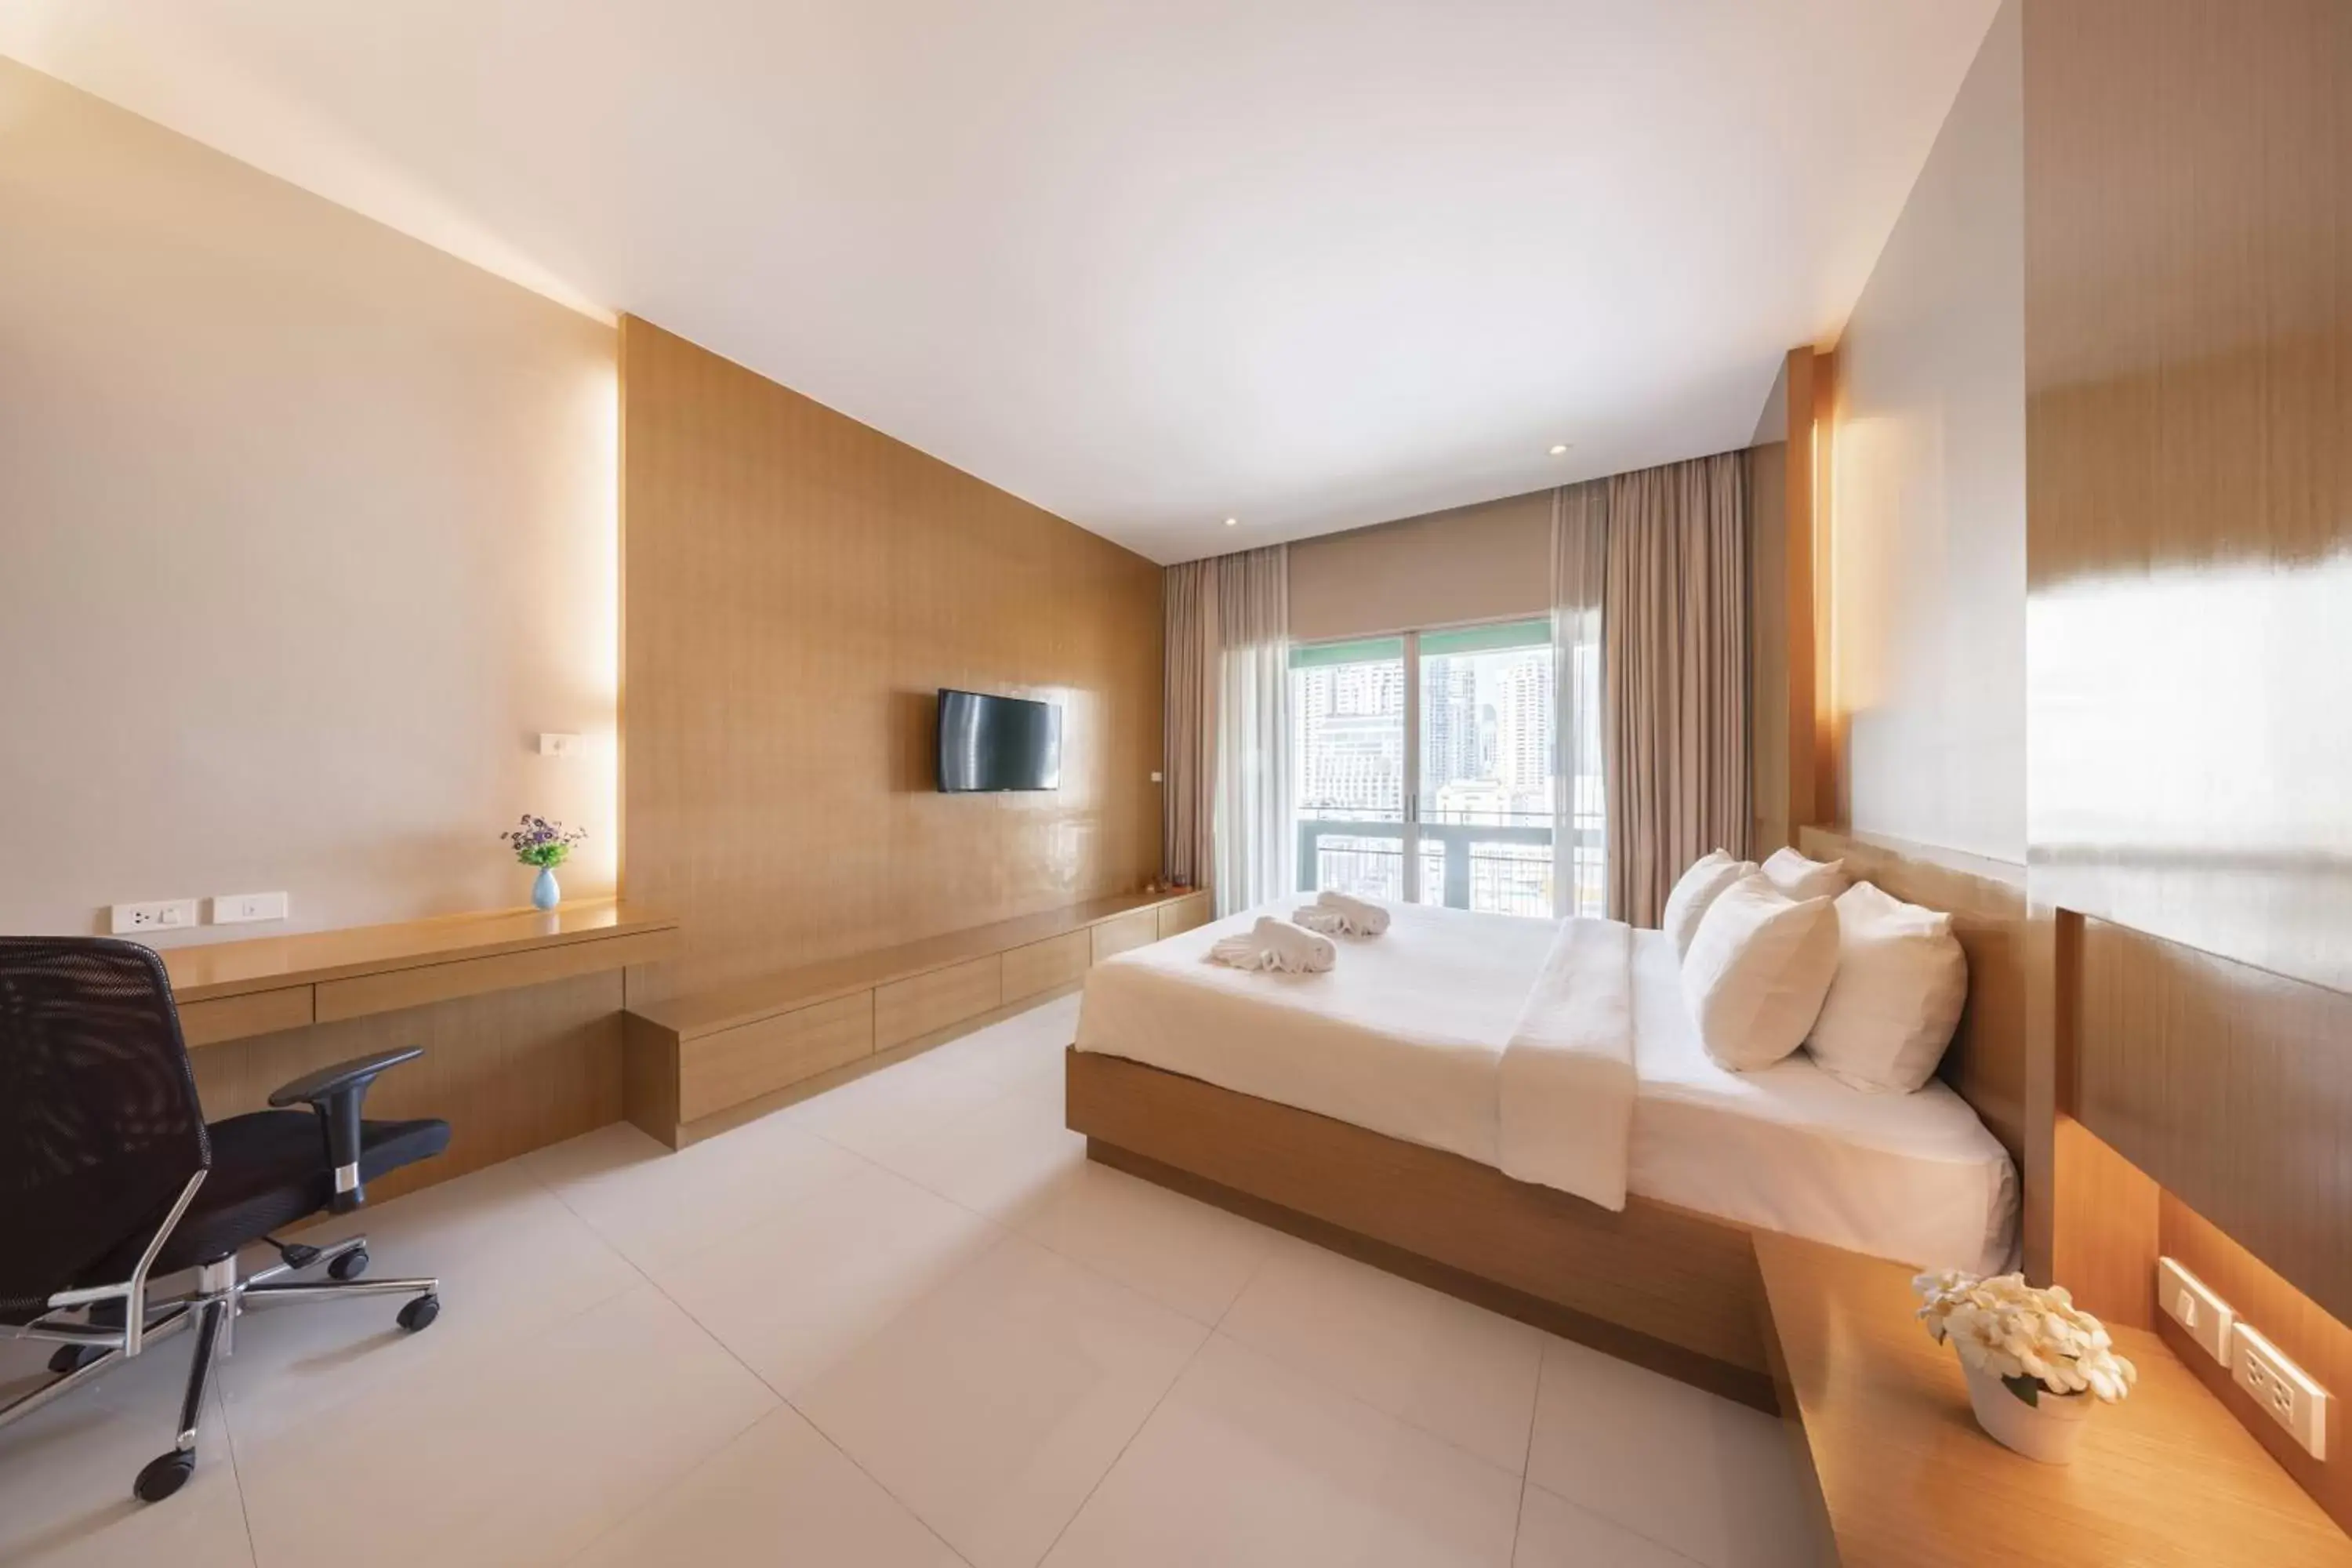 Bedroom in At 115 Hotel By Rompo